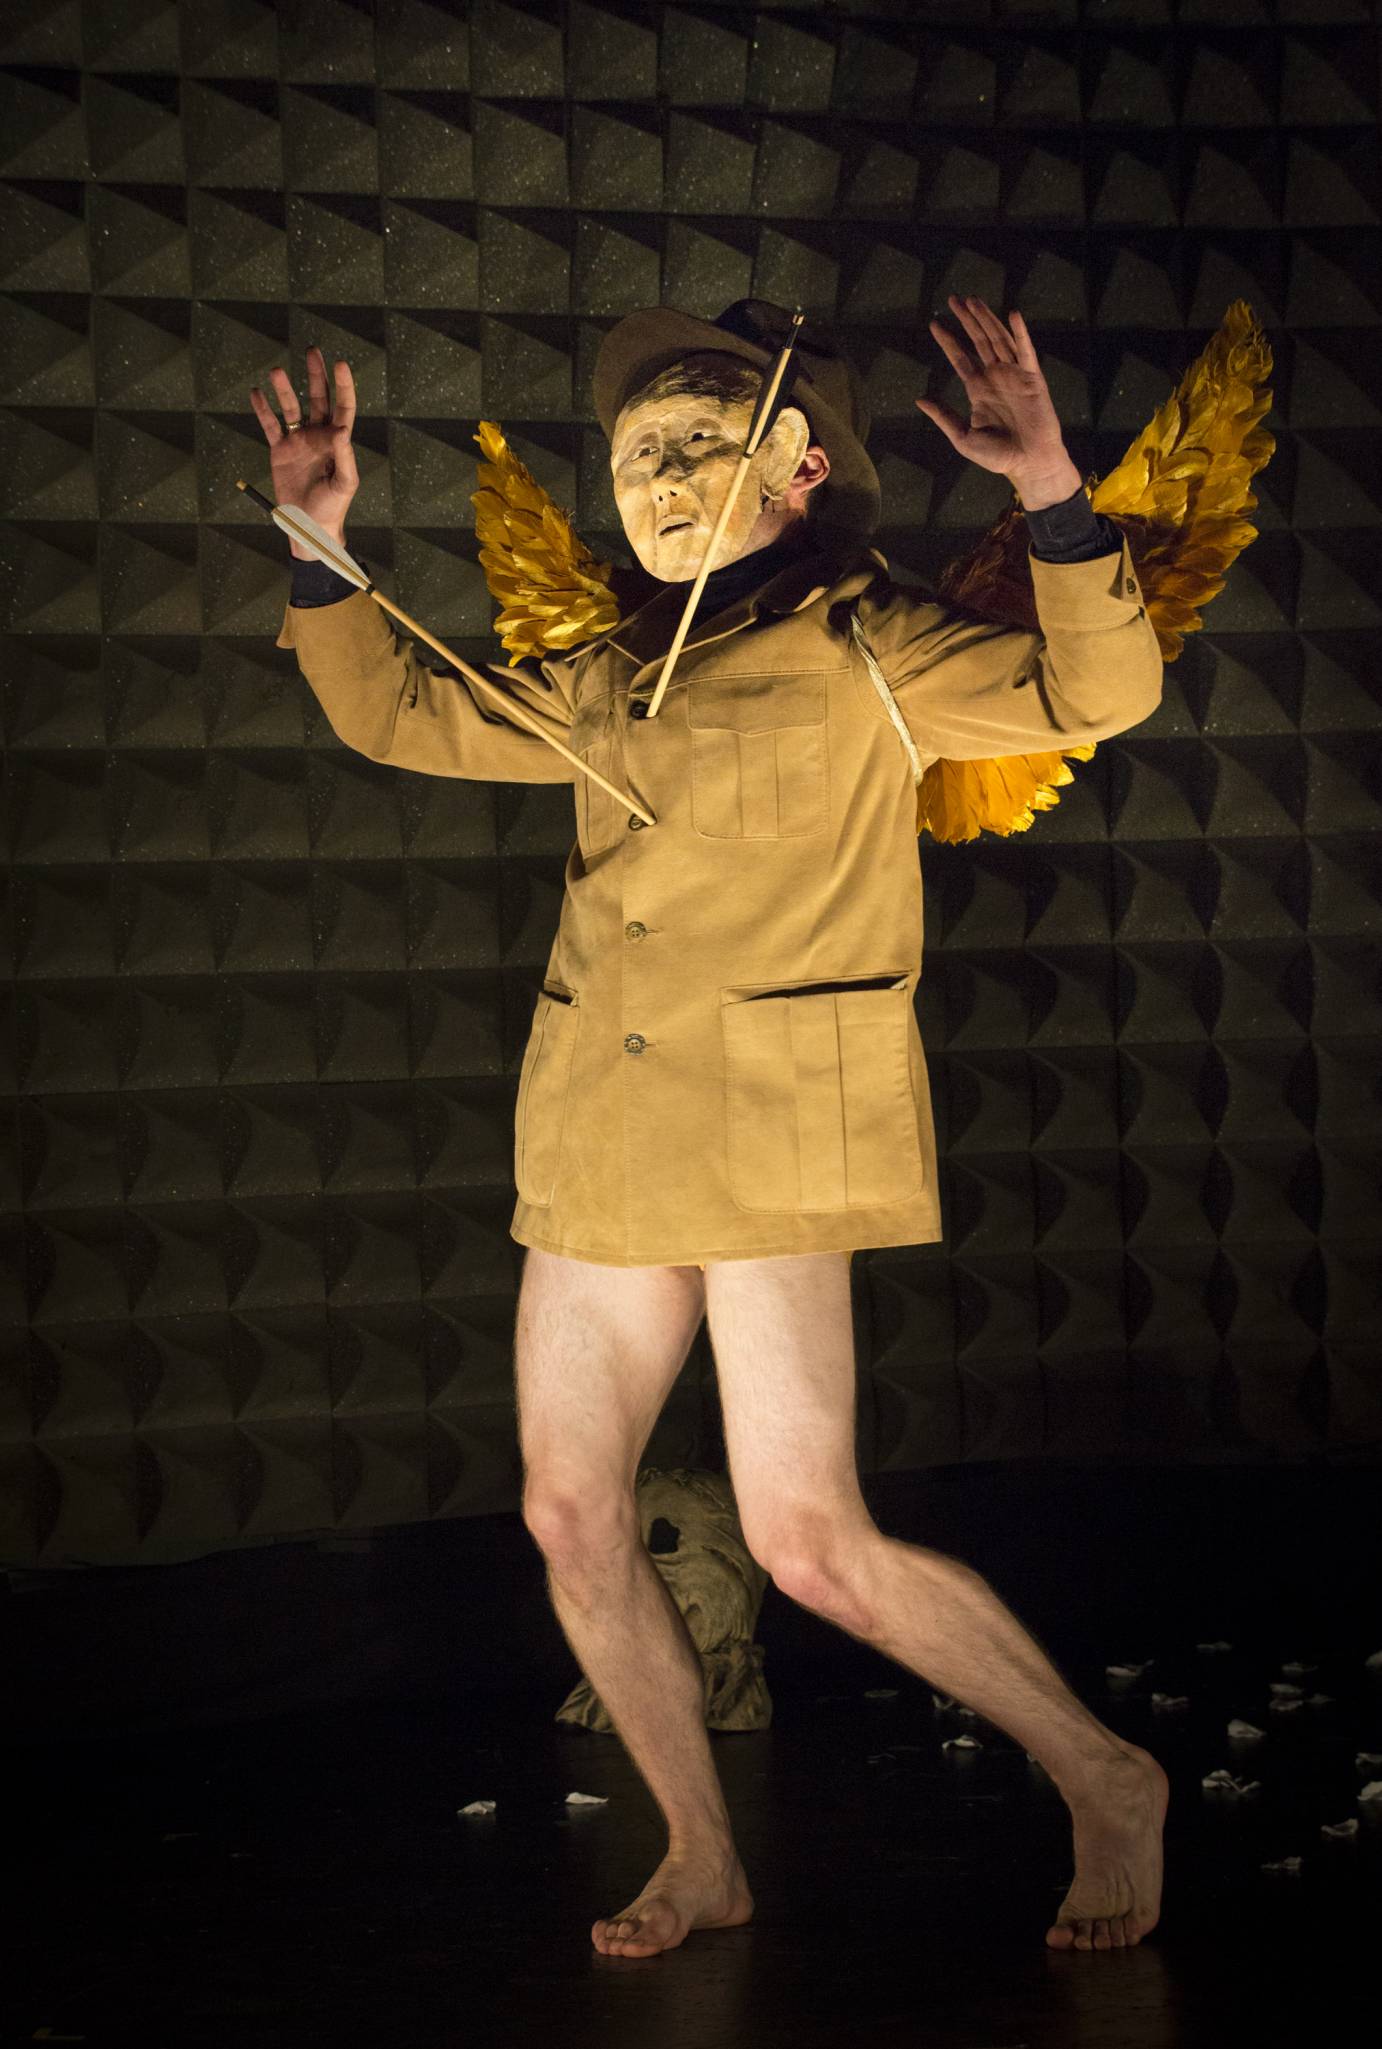 A man wears a mustard yellow jacket, no pants, his face obscured by a mask. 